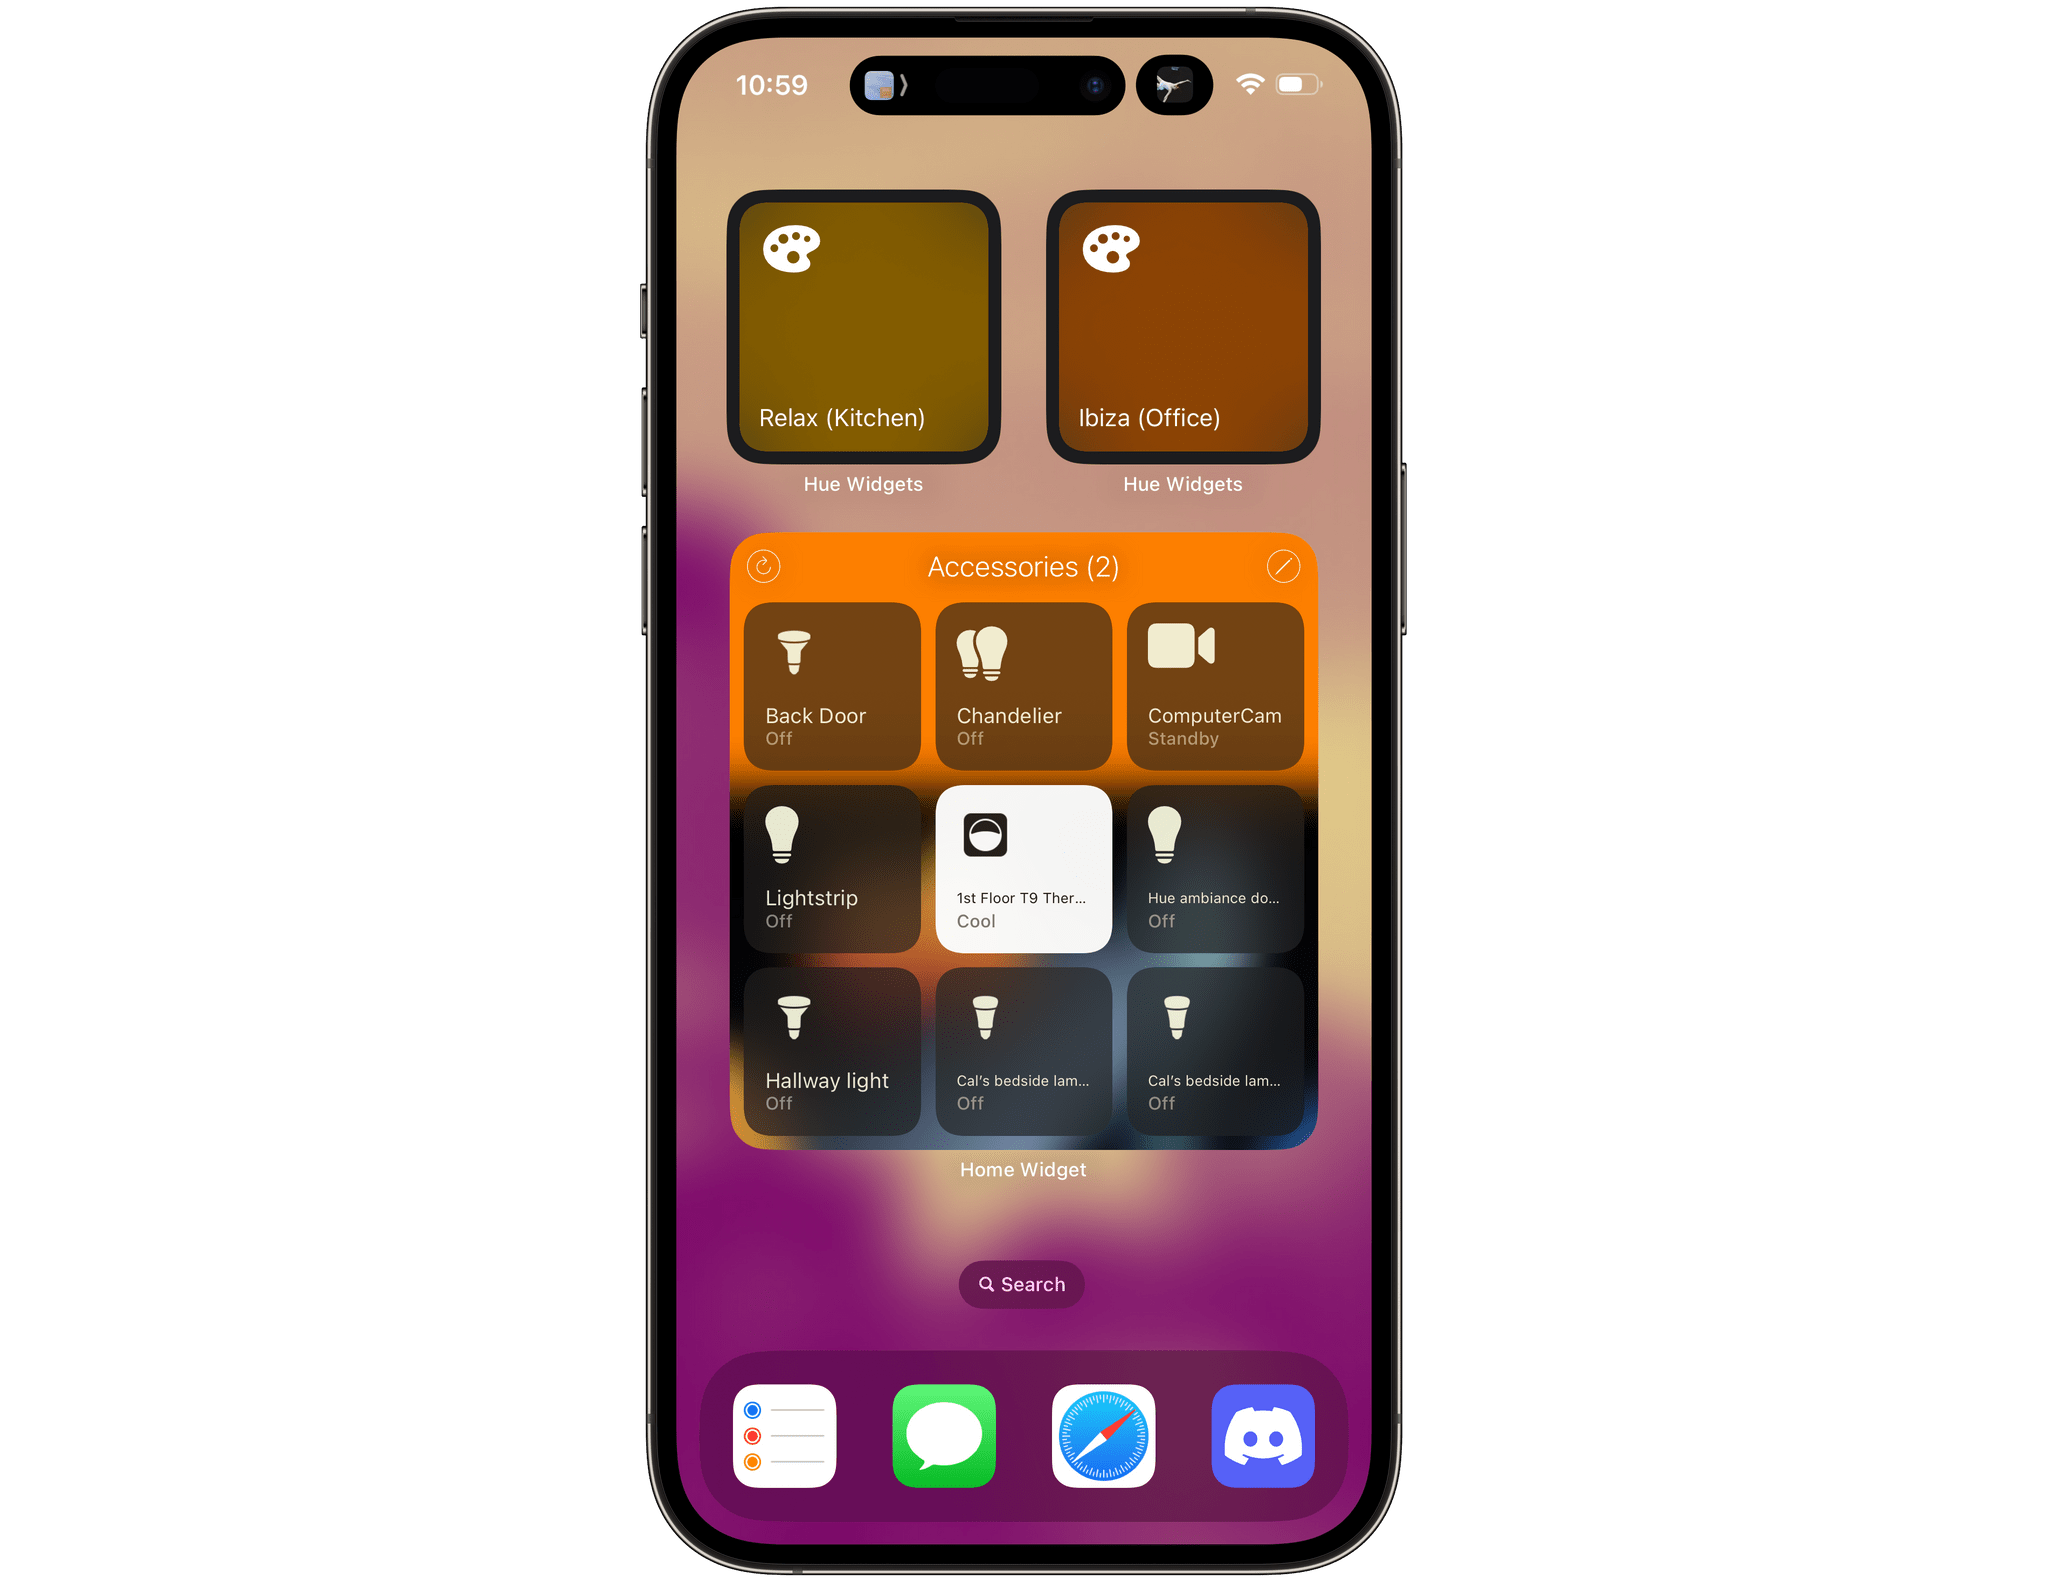 Hue Widgets pairs nicely with Home Widget, which [I recently reviewed](https://www.macstories.net/reviews/home-widget-unlocks-homekit-device-control-that-apples-home-app-doesnt-offer/).